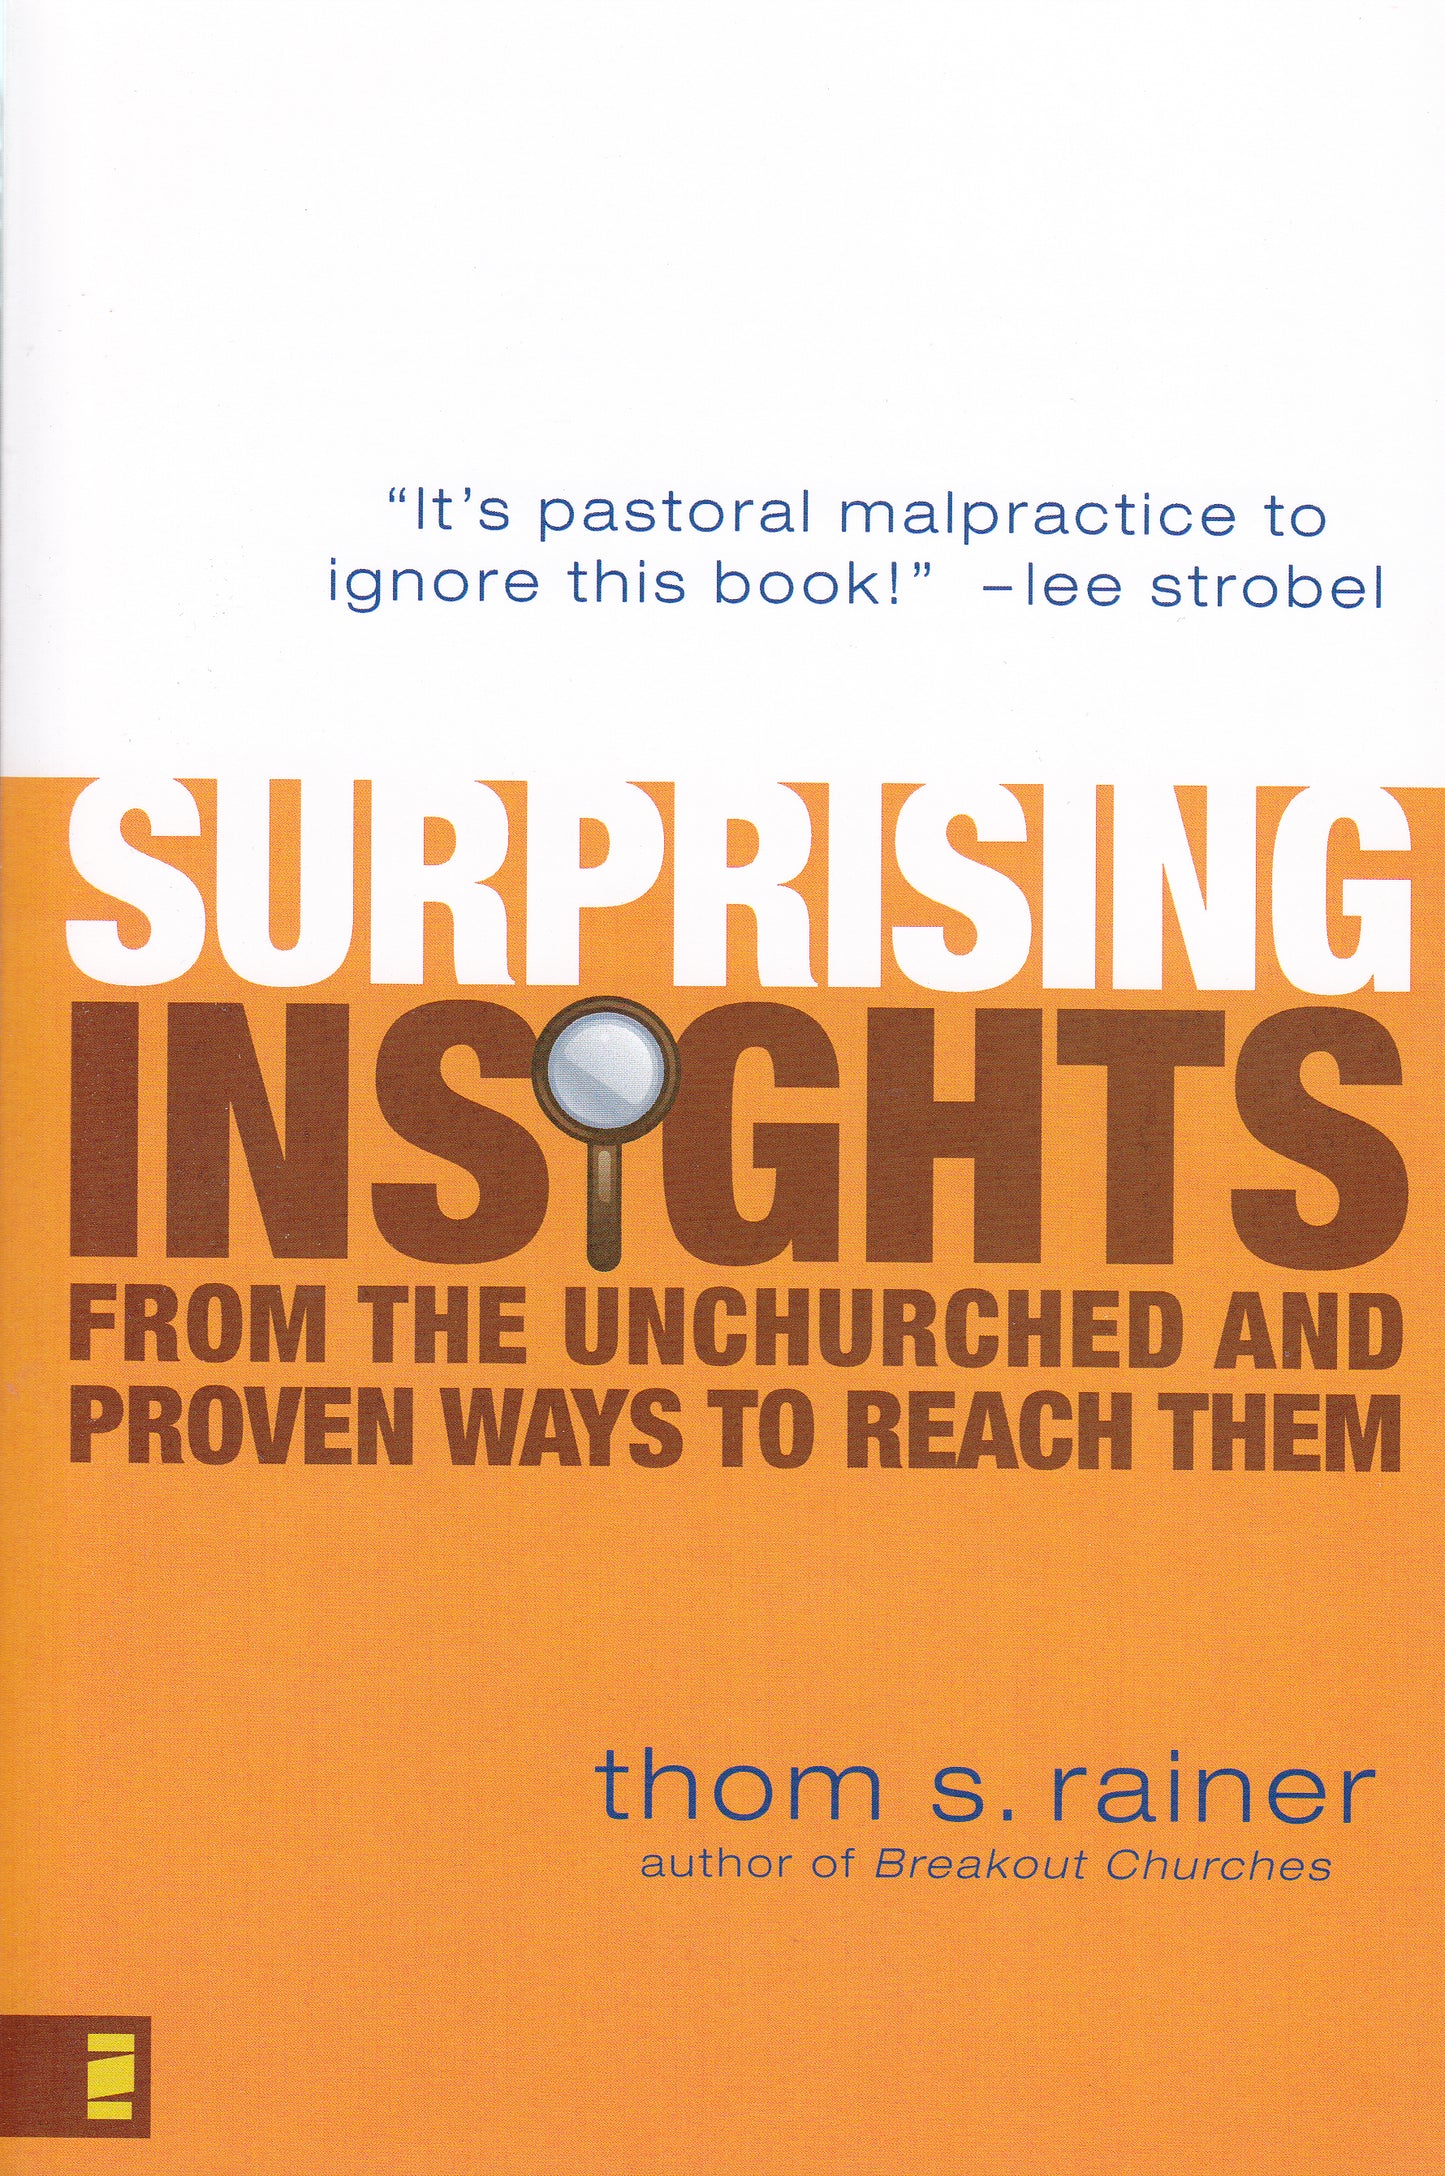 Surprising Insights From the Unchurched and Proven Ways to Reach Them